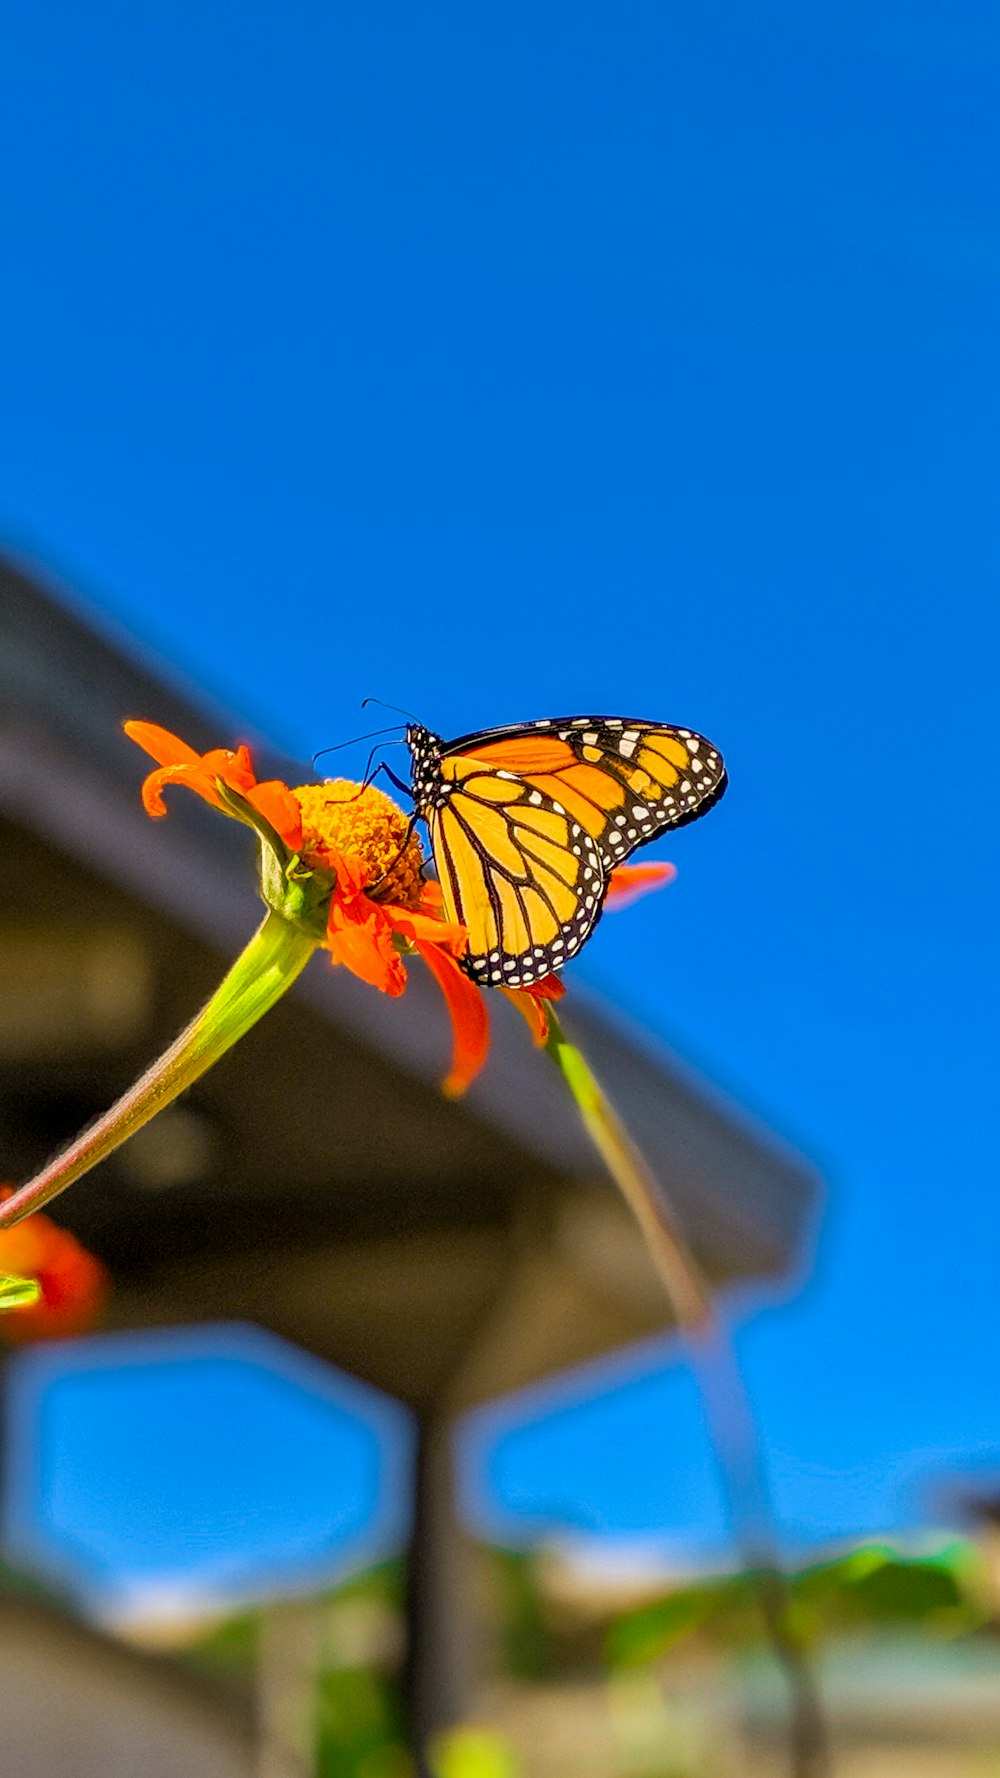 monarch butterfly perched on orange flower in close up photography during daytime